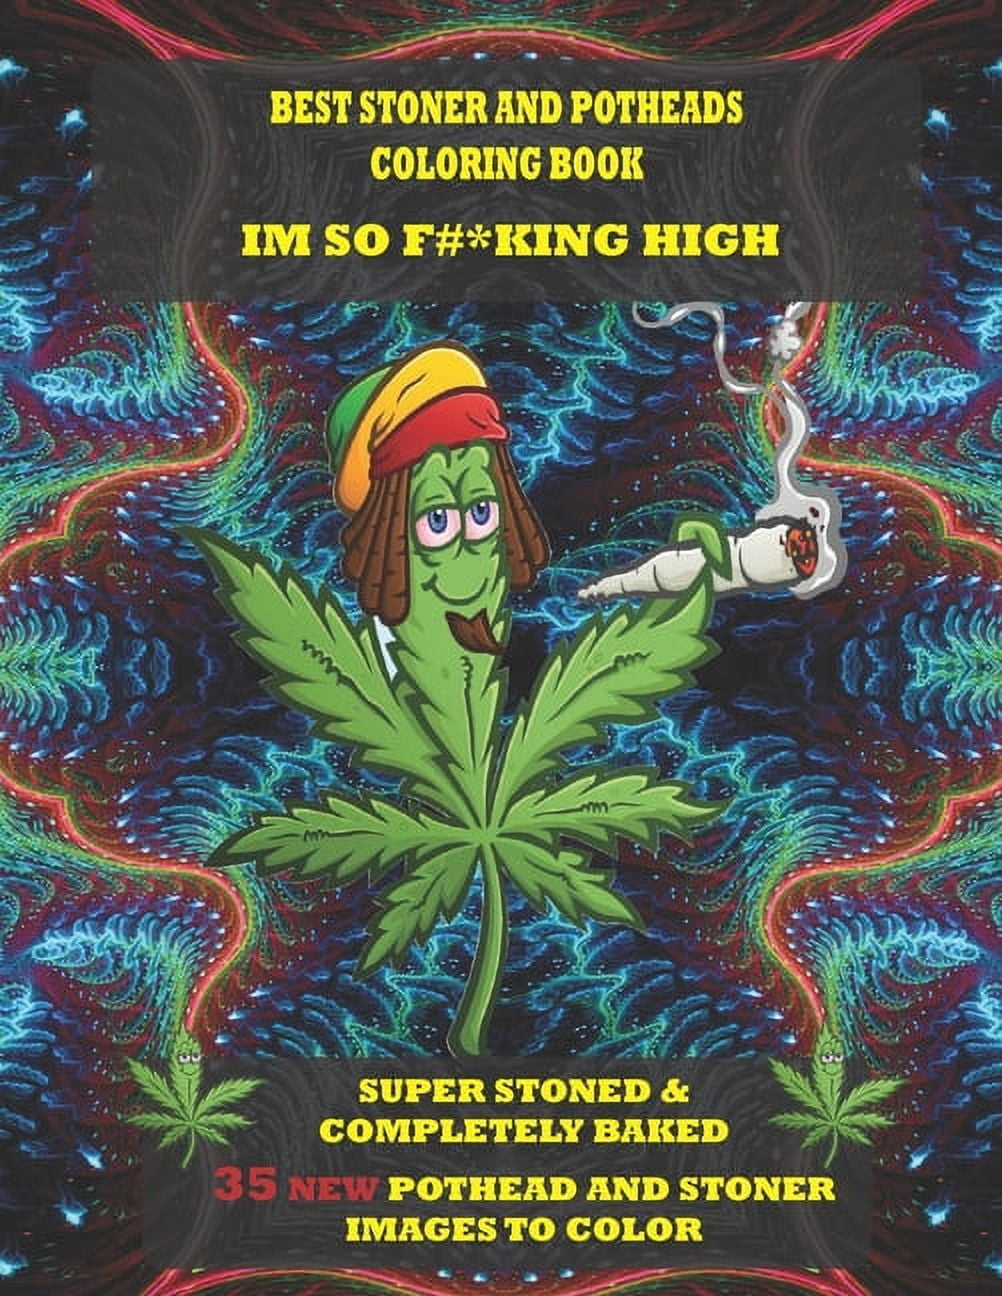 Best Stoner and Potheads Coloring Im Book So F#*king High: Super Stoned And Completely Baked [Book]